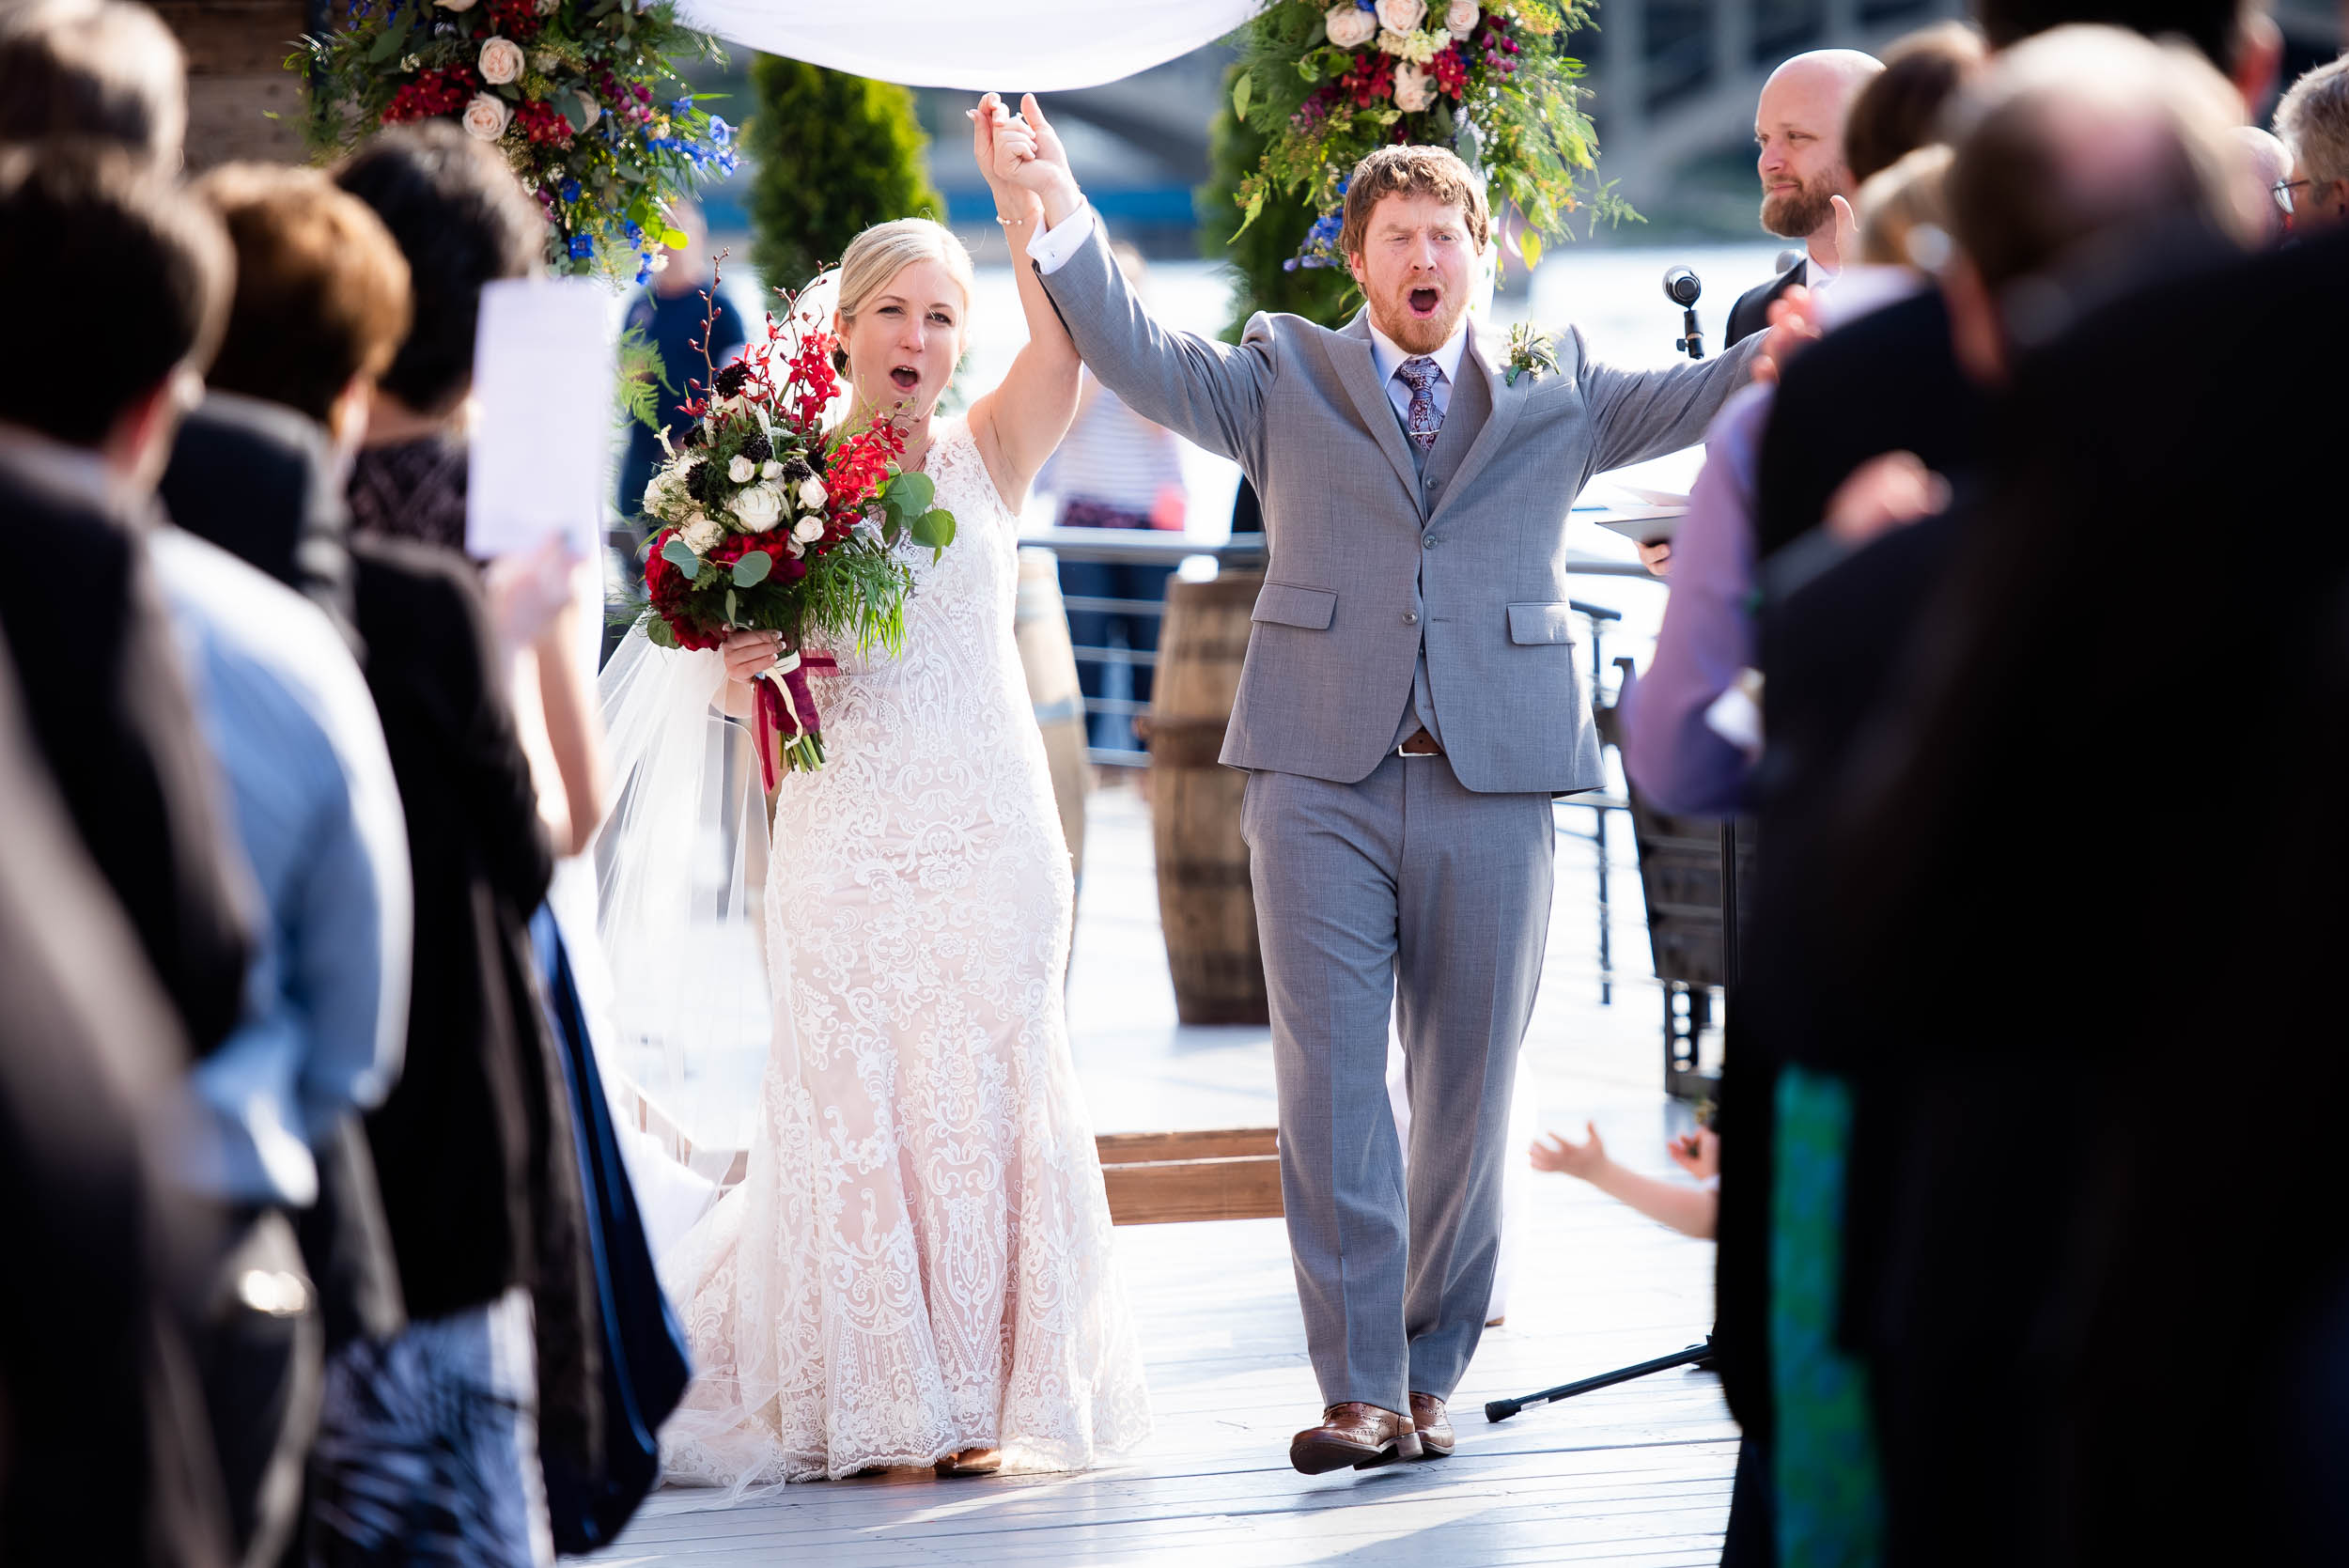 Wedding ceremony exit: Modern industrial Chicago wedding inside Prairie Street Brewhouse captured by J. Brown Photography. Find more wedding ideas at jbrownphotography.com!